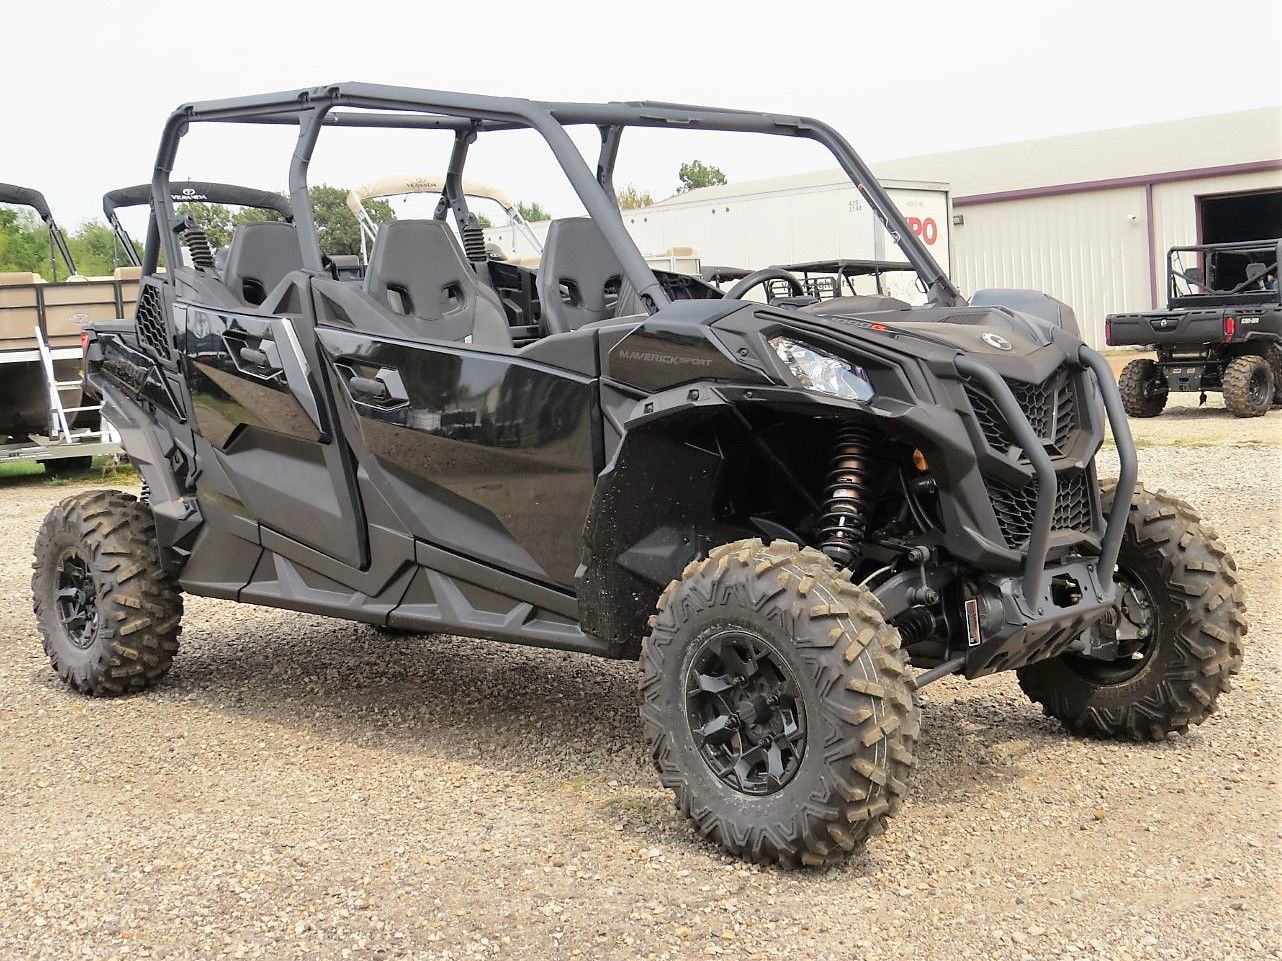 2023 Can-Am Maverick Sport Max DPS in Mount Pleasant, Texas - Photo 1